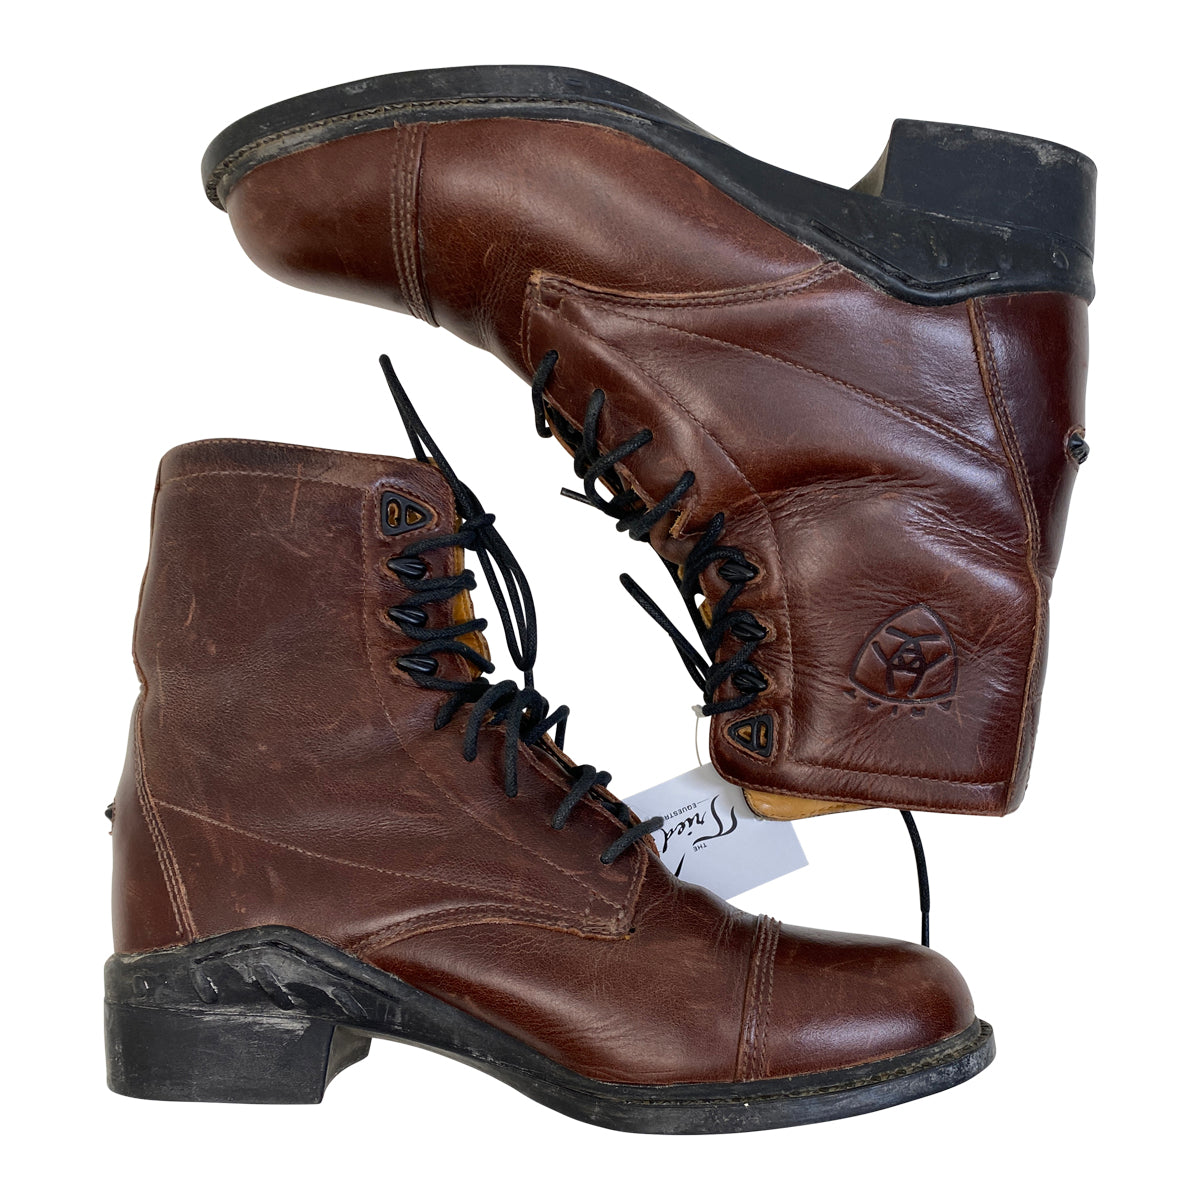 Ariat 'Heritage' Lace Up Paddock Boot in Brown